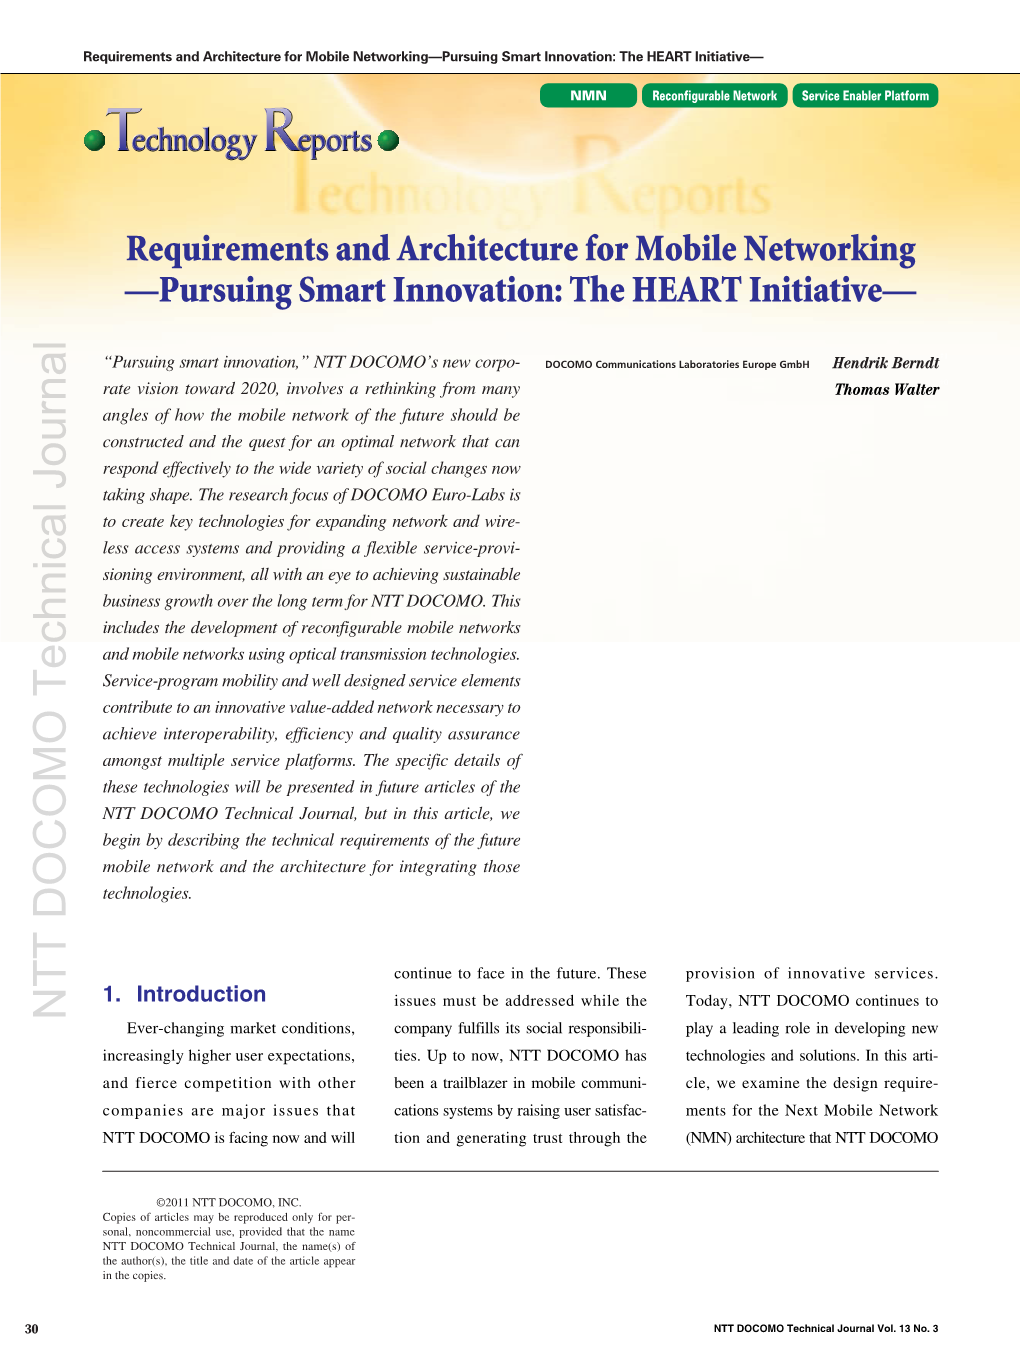 Requirements and Architecture for Mobile Networking —Pursuing Smart Innovation: the HEART Initiative—